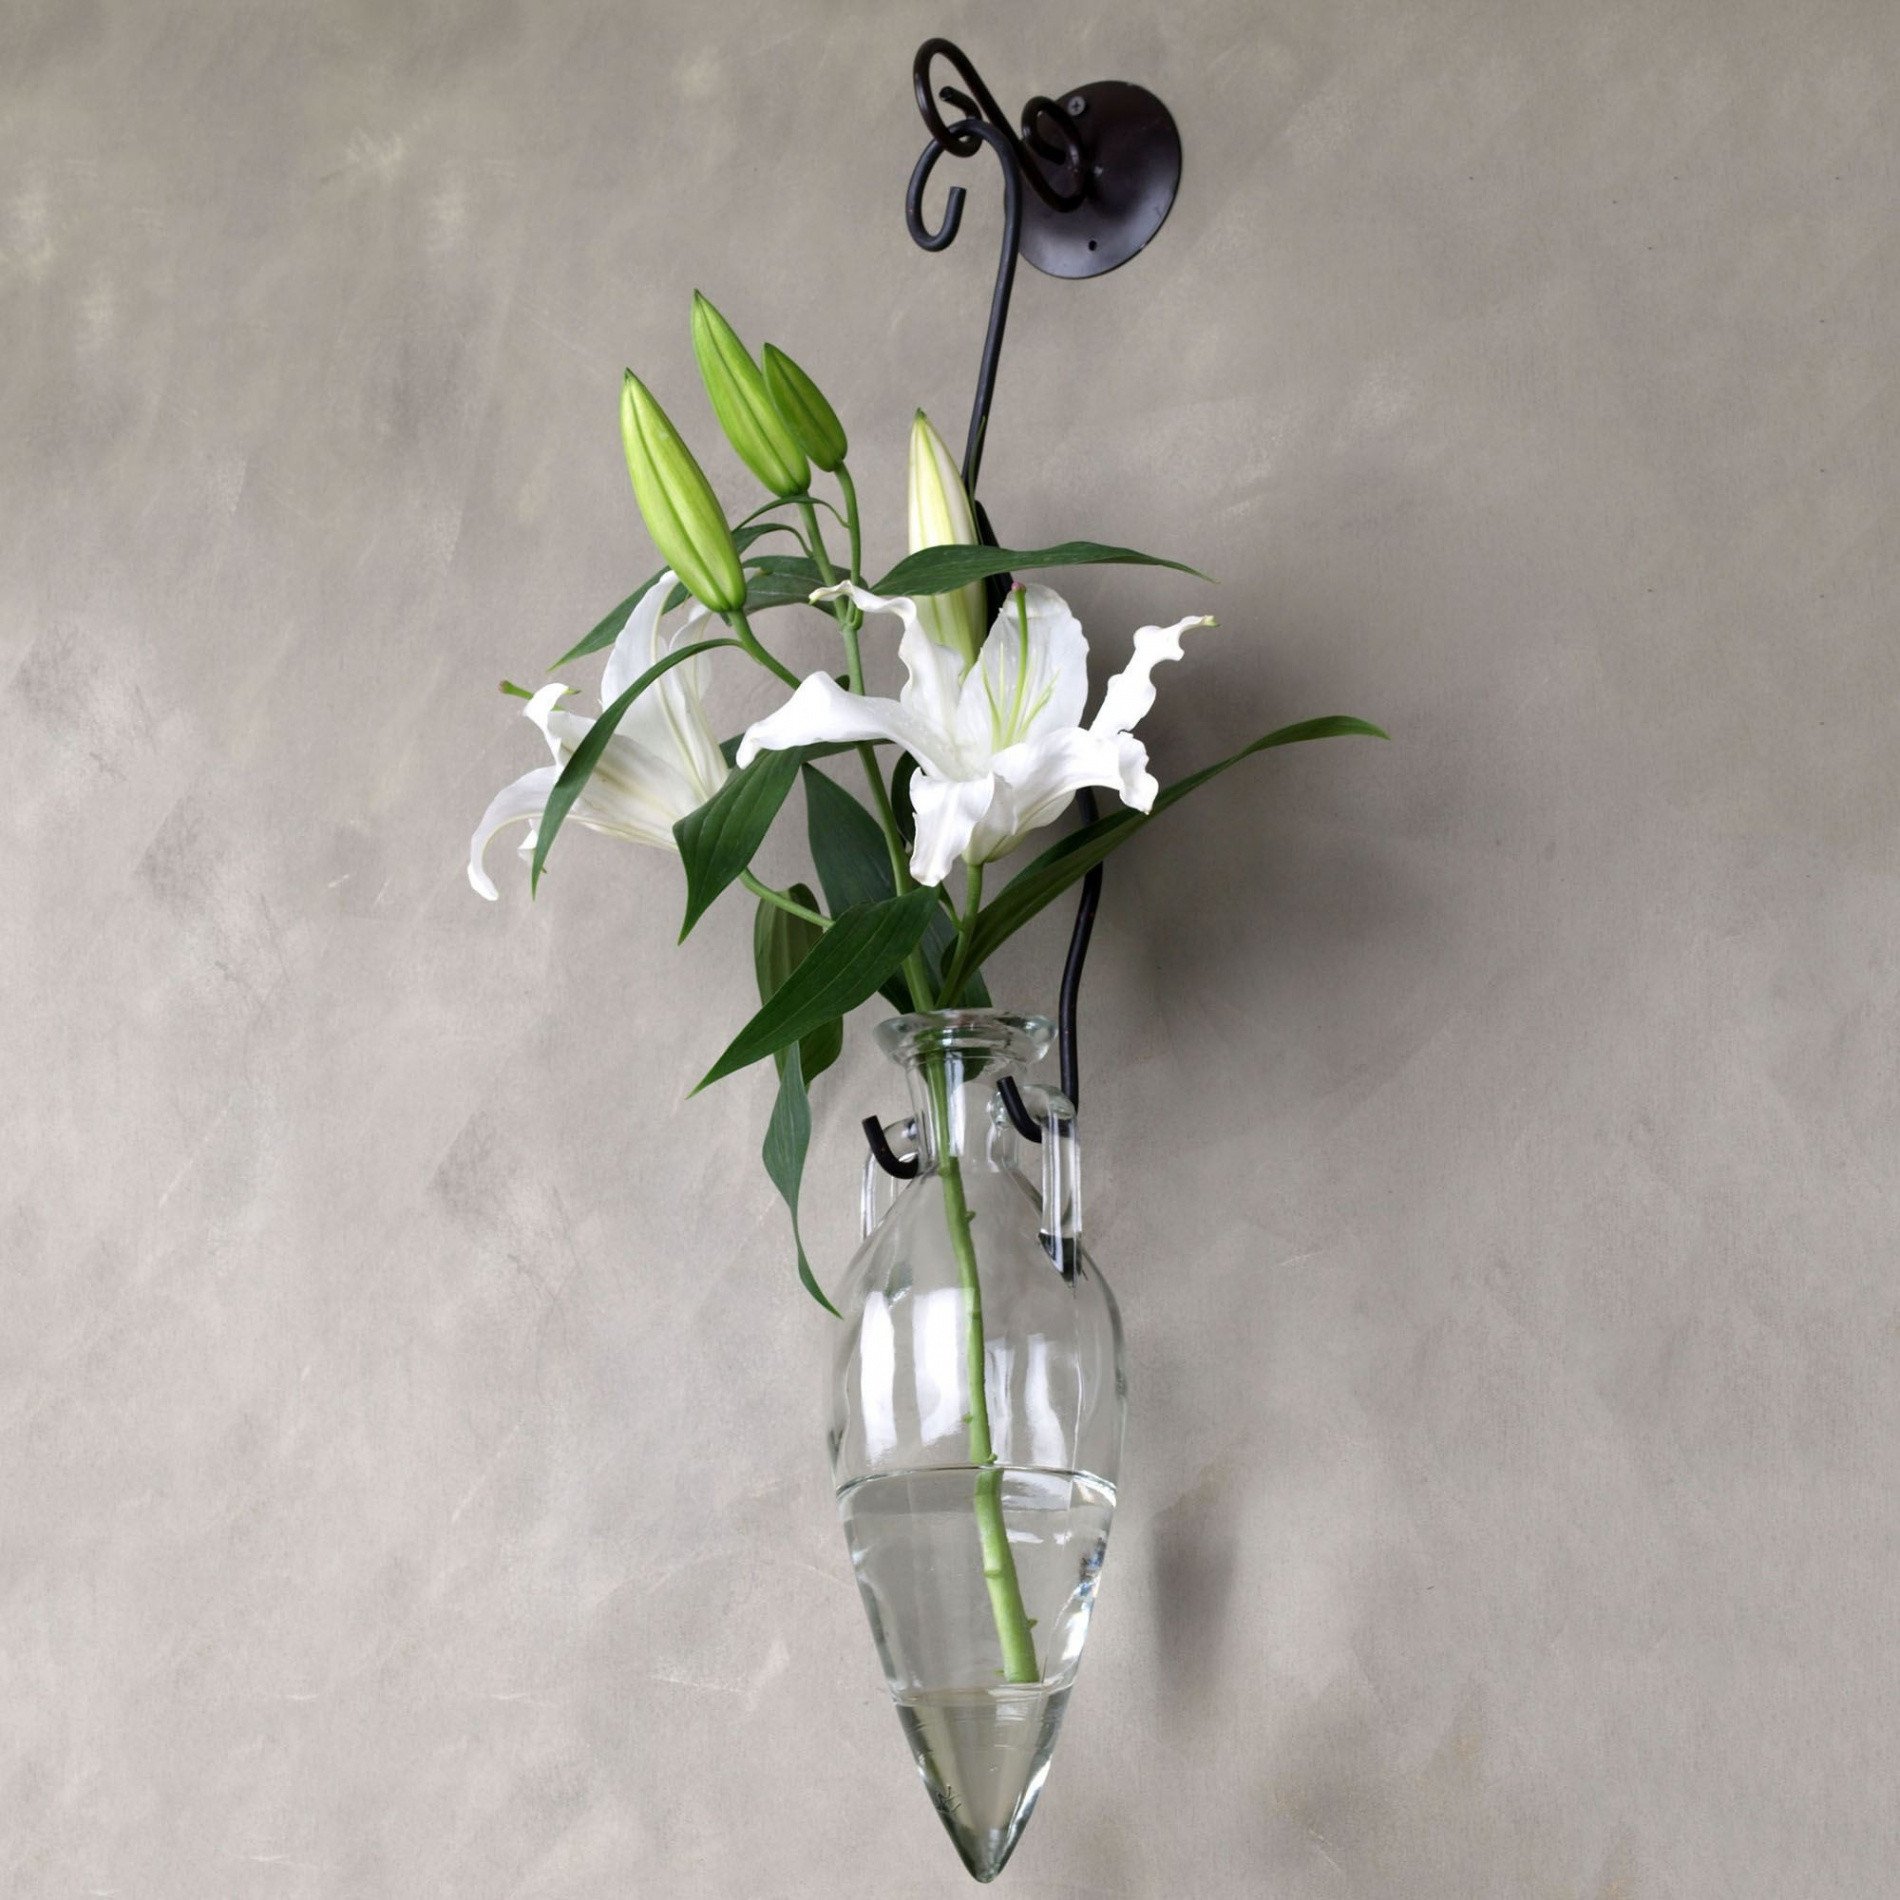 22 Lovely Tall Glass Vases for Centerpieces 2024 free download tall glass vases for centerpieces of h vases wall hanging flower vase newspaper i 0d scheme wall scheme pertaining to h vases wall hanging flower vase newspaper i 0d scheme wall scheme vase 